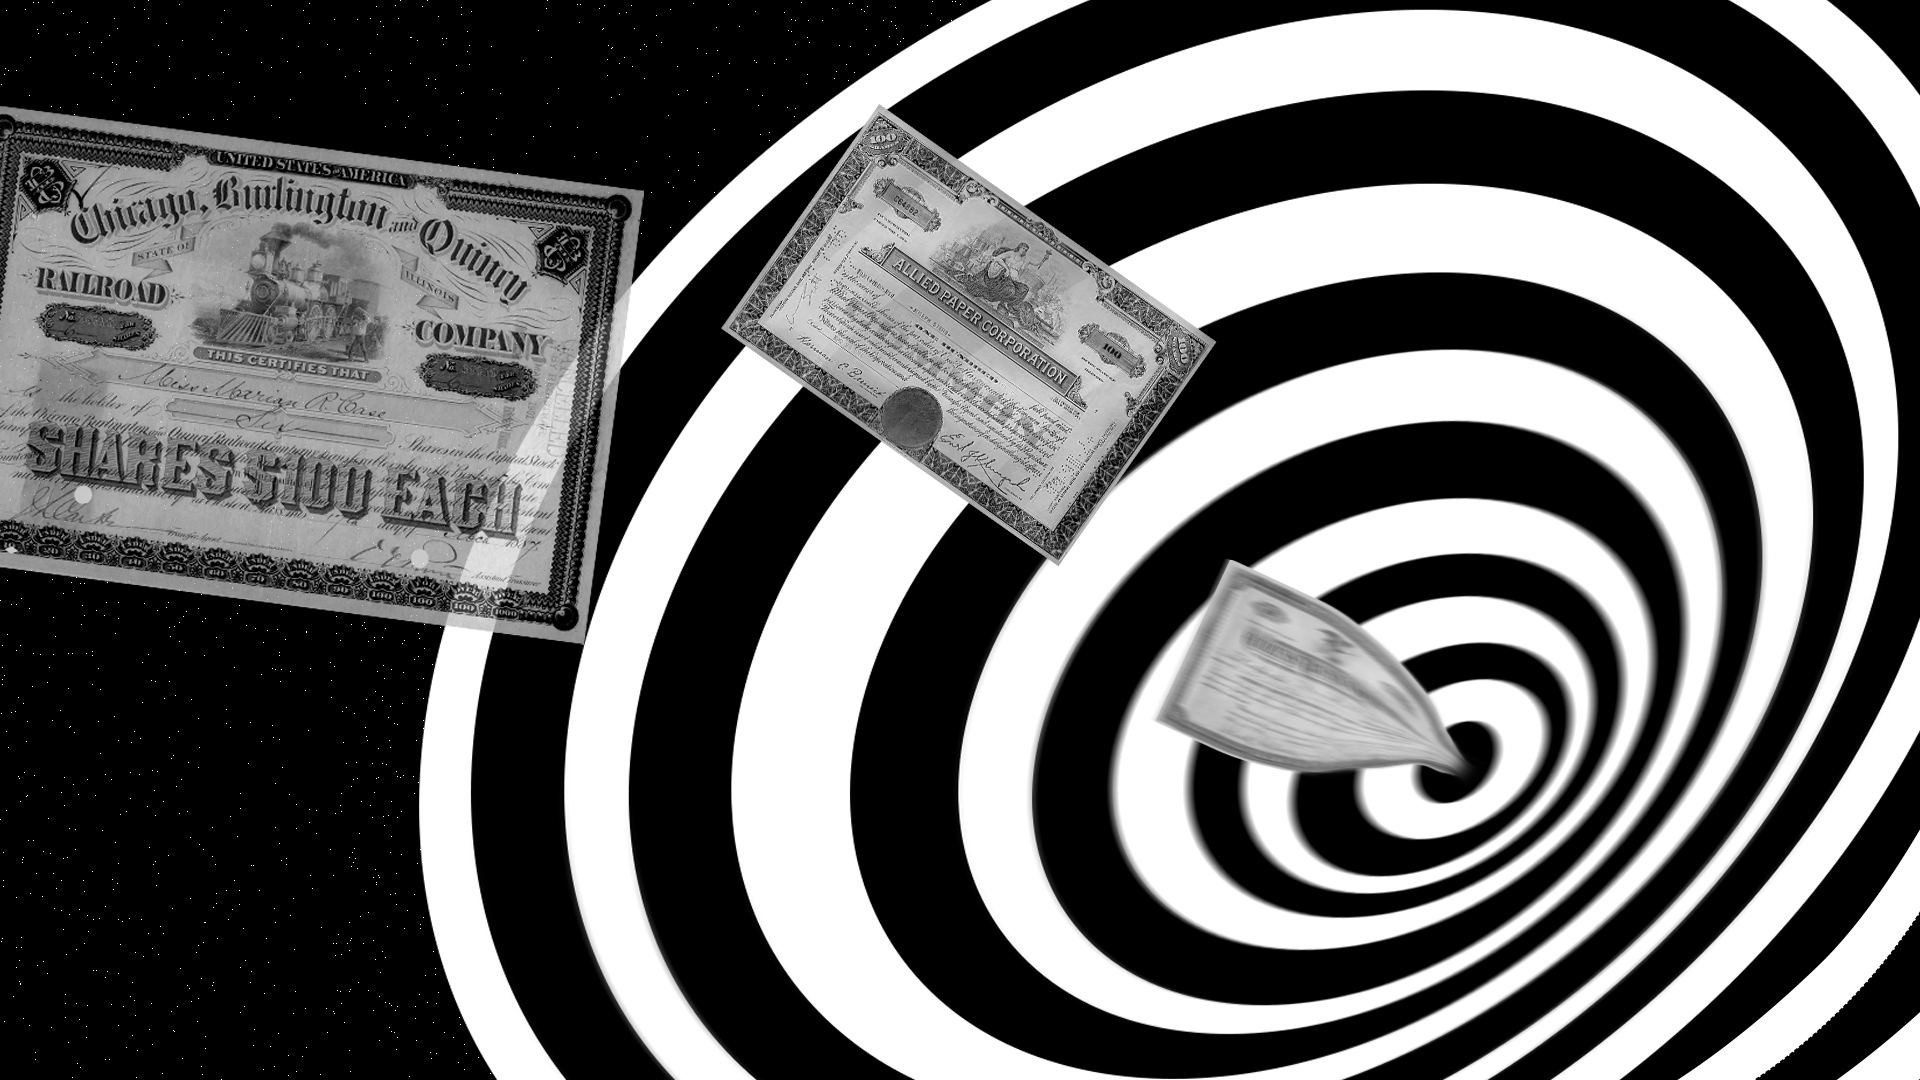 Illustration of stock certificates being sucked into a Twilight Zone style warp hole.